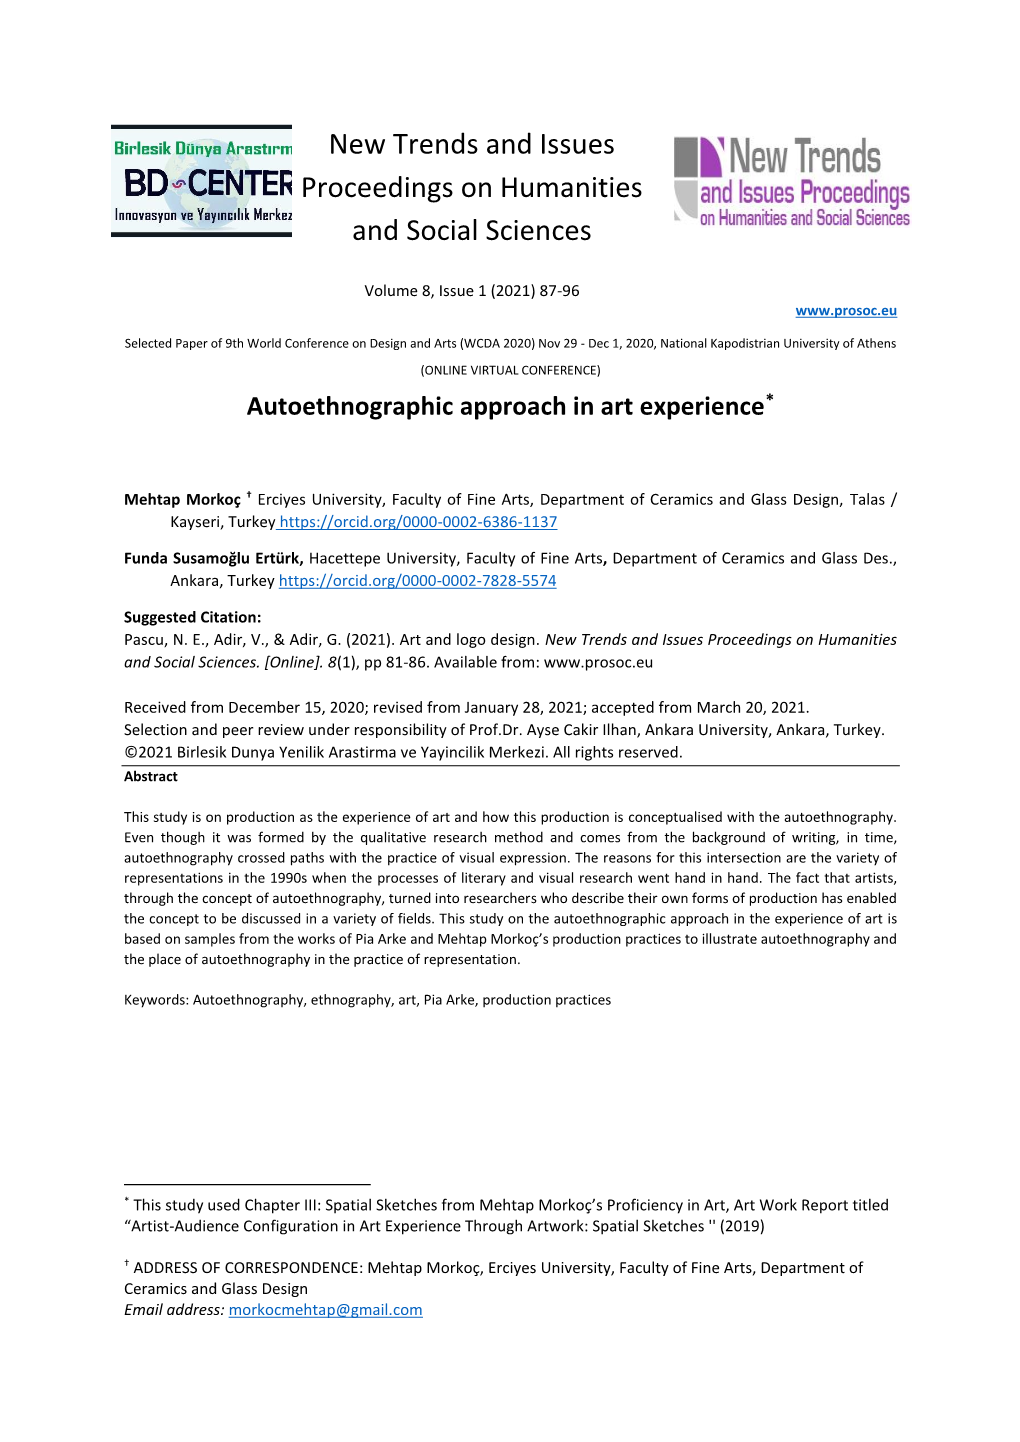 Autoethnographic Approach in Art Experience*